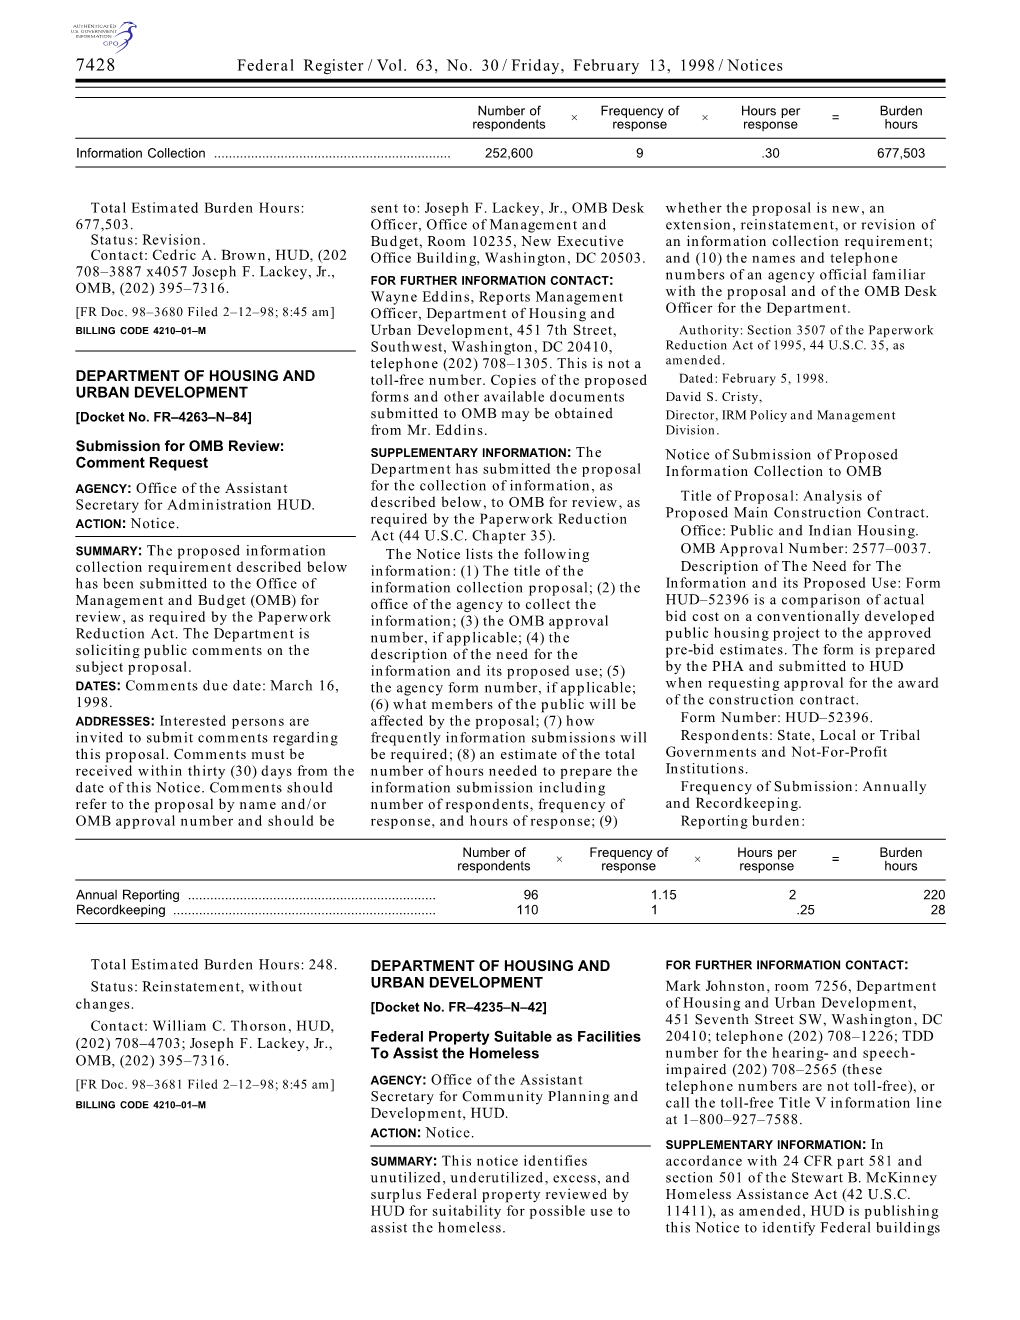 Federal Register/Vol. 63, No. 30/Friday, February 13, 1998/Notices